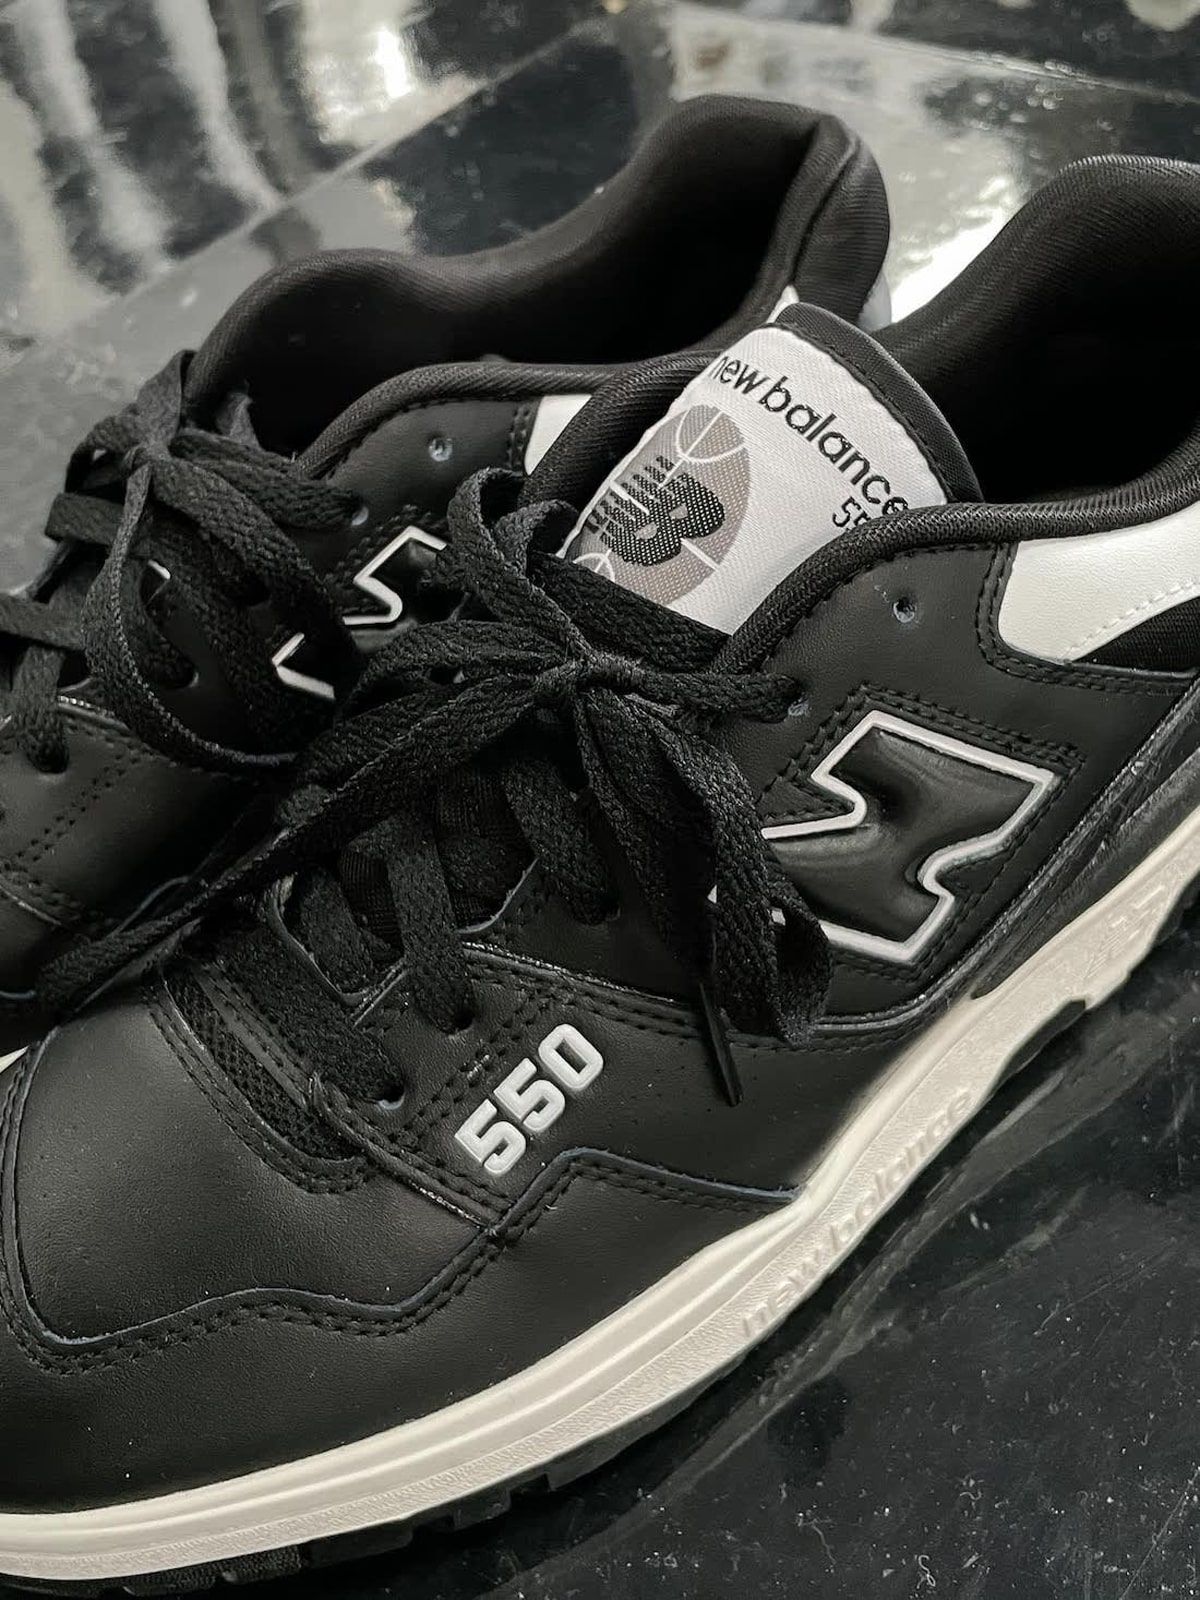 First Looks at the COMME des GARÇONS x New Balance 550 Collection 